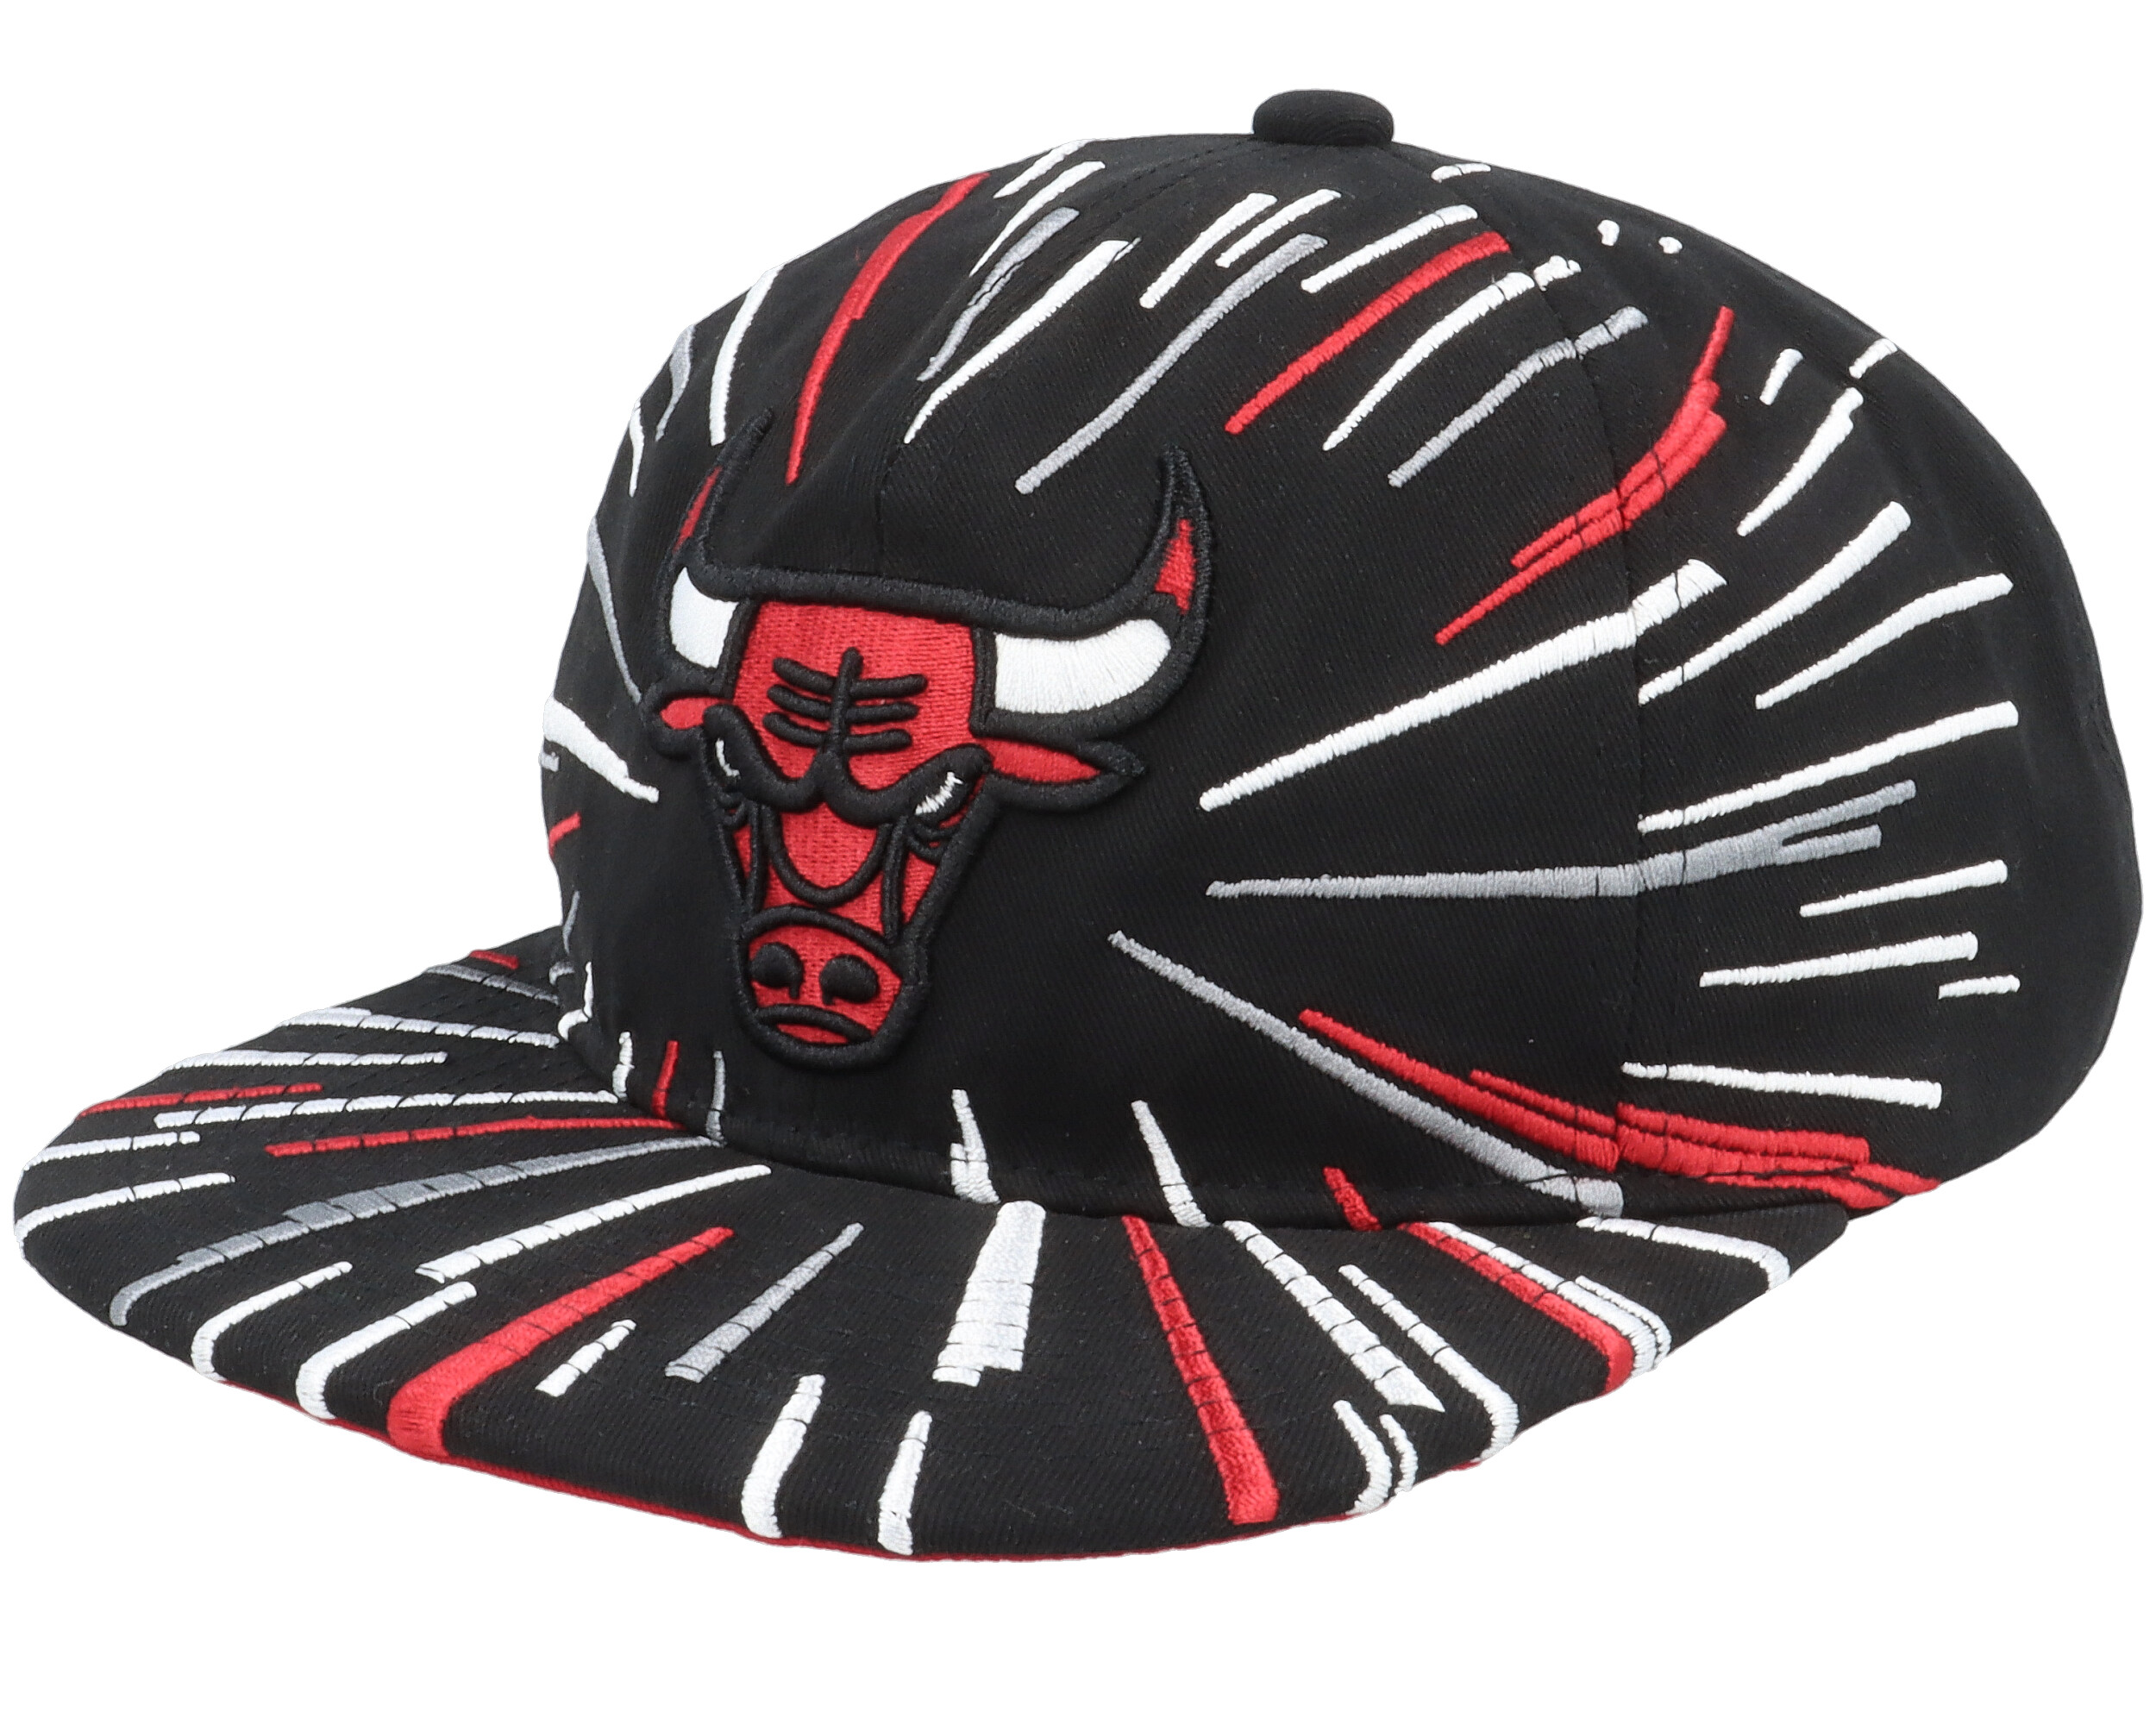 Men's Mitchell & Ness White Chicago Bulls Hardwood Classics in Your Face Deadstock Snapback Hat